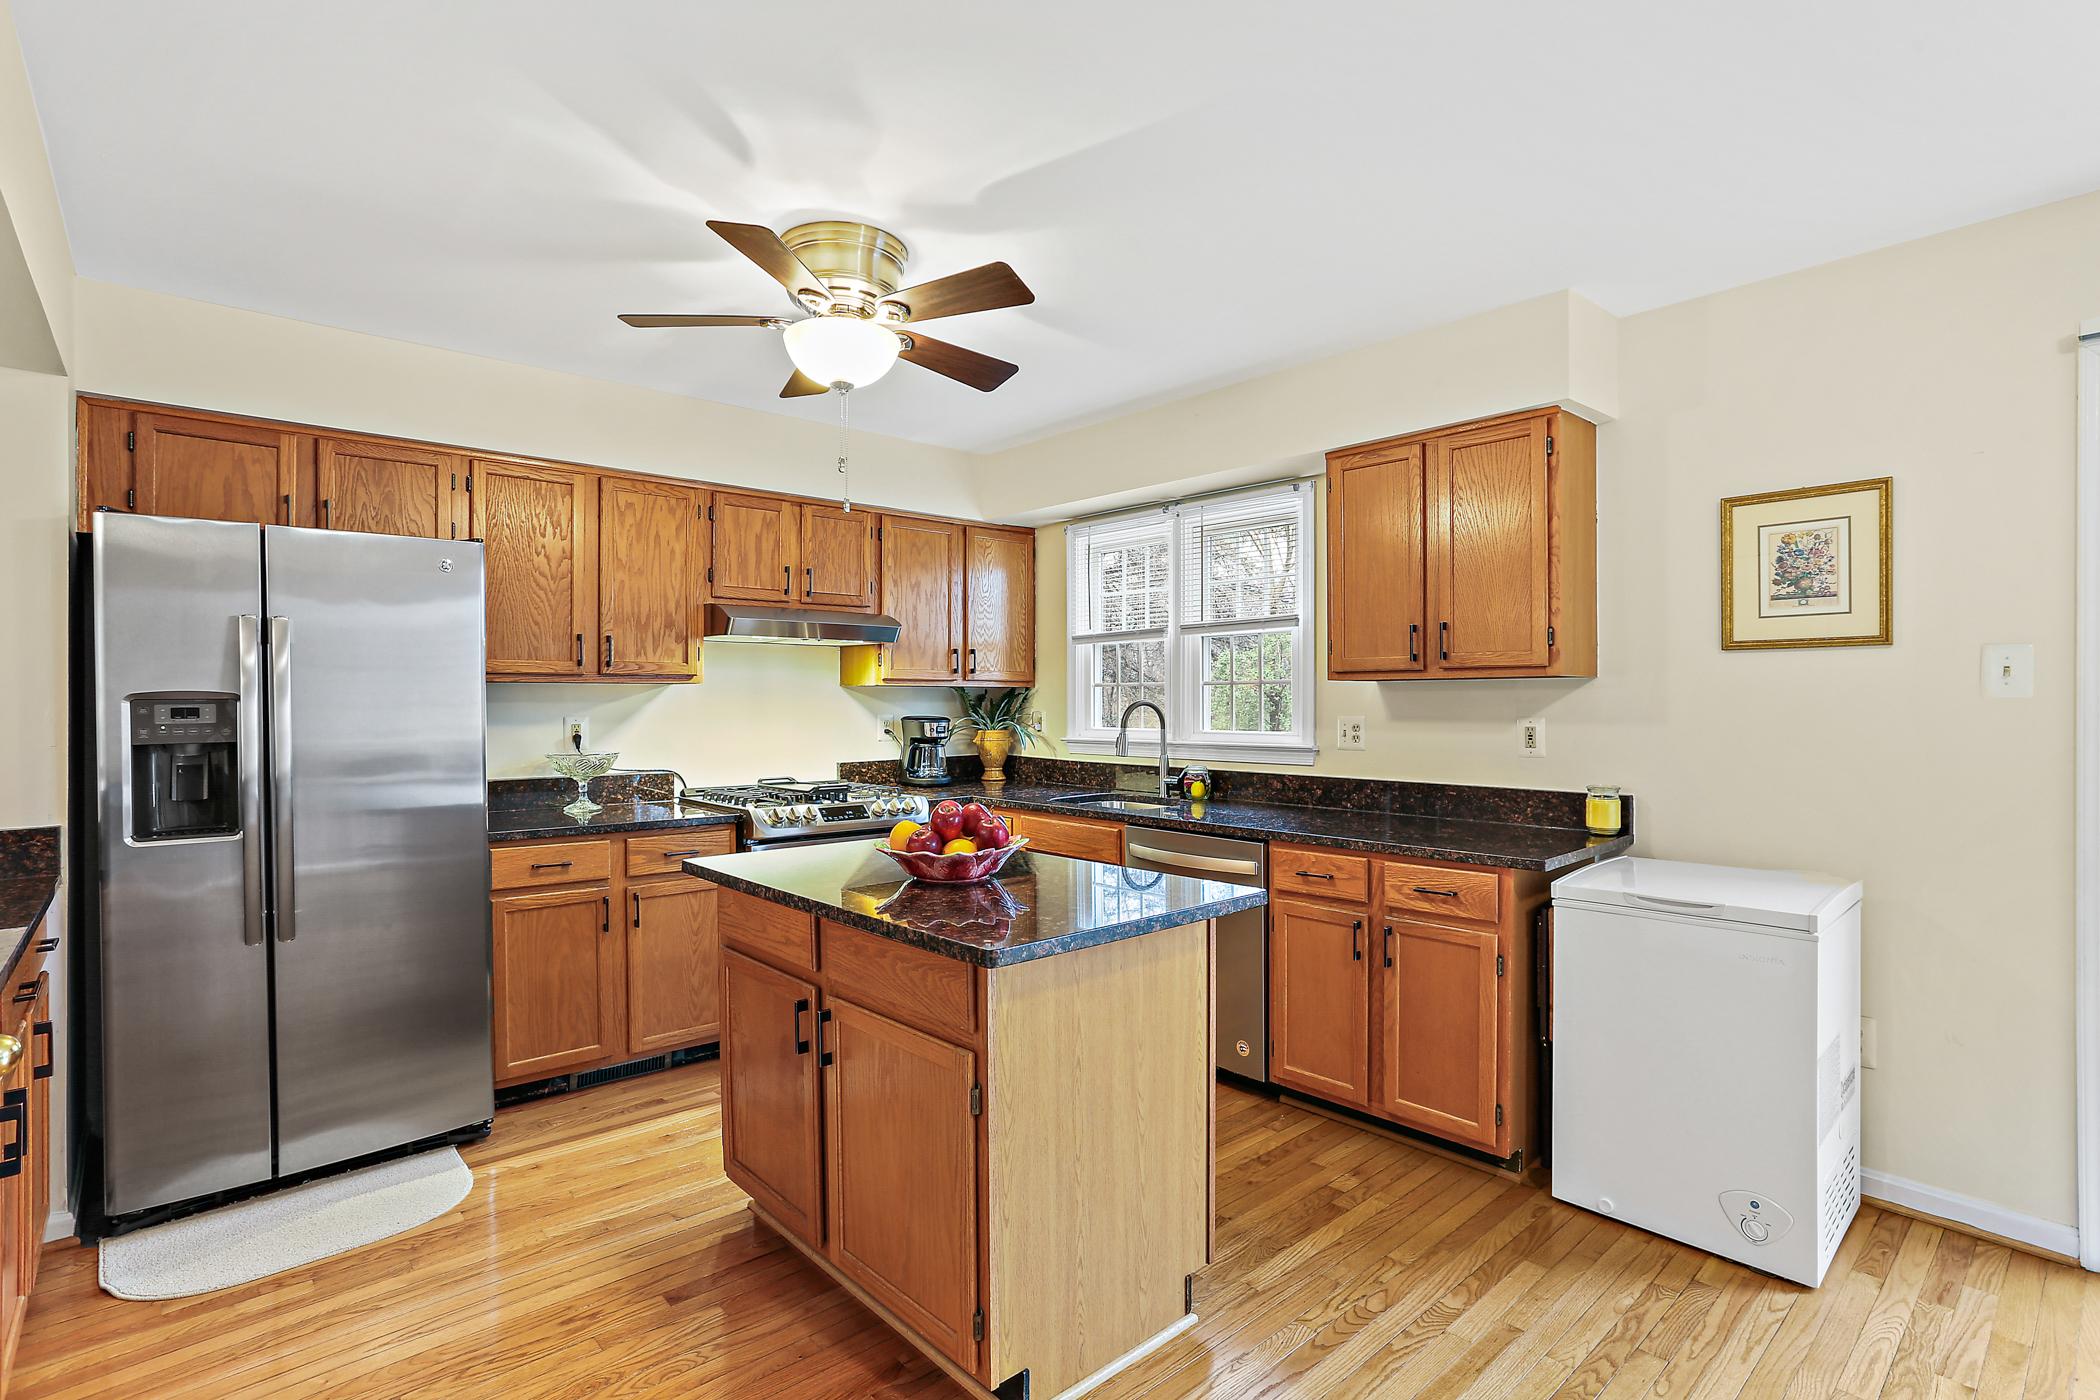 6203 Knolls Ct, kitchen with island, stainless appliances and wooden cabinets.